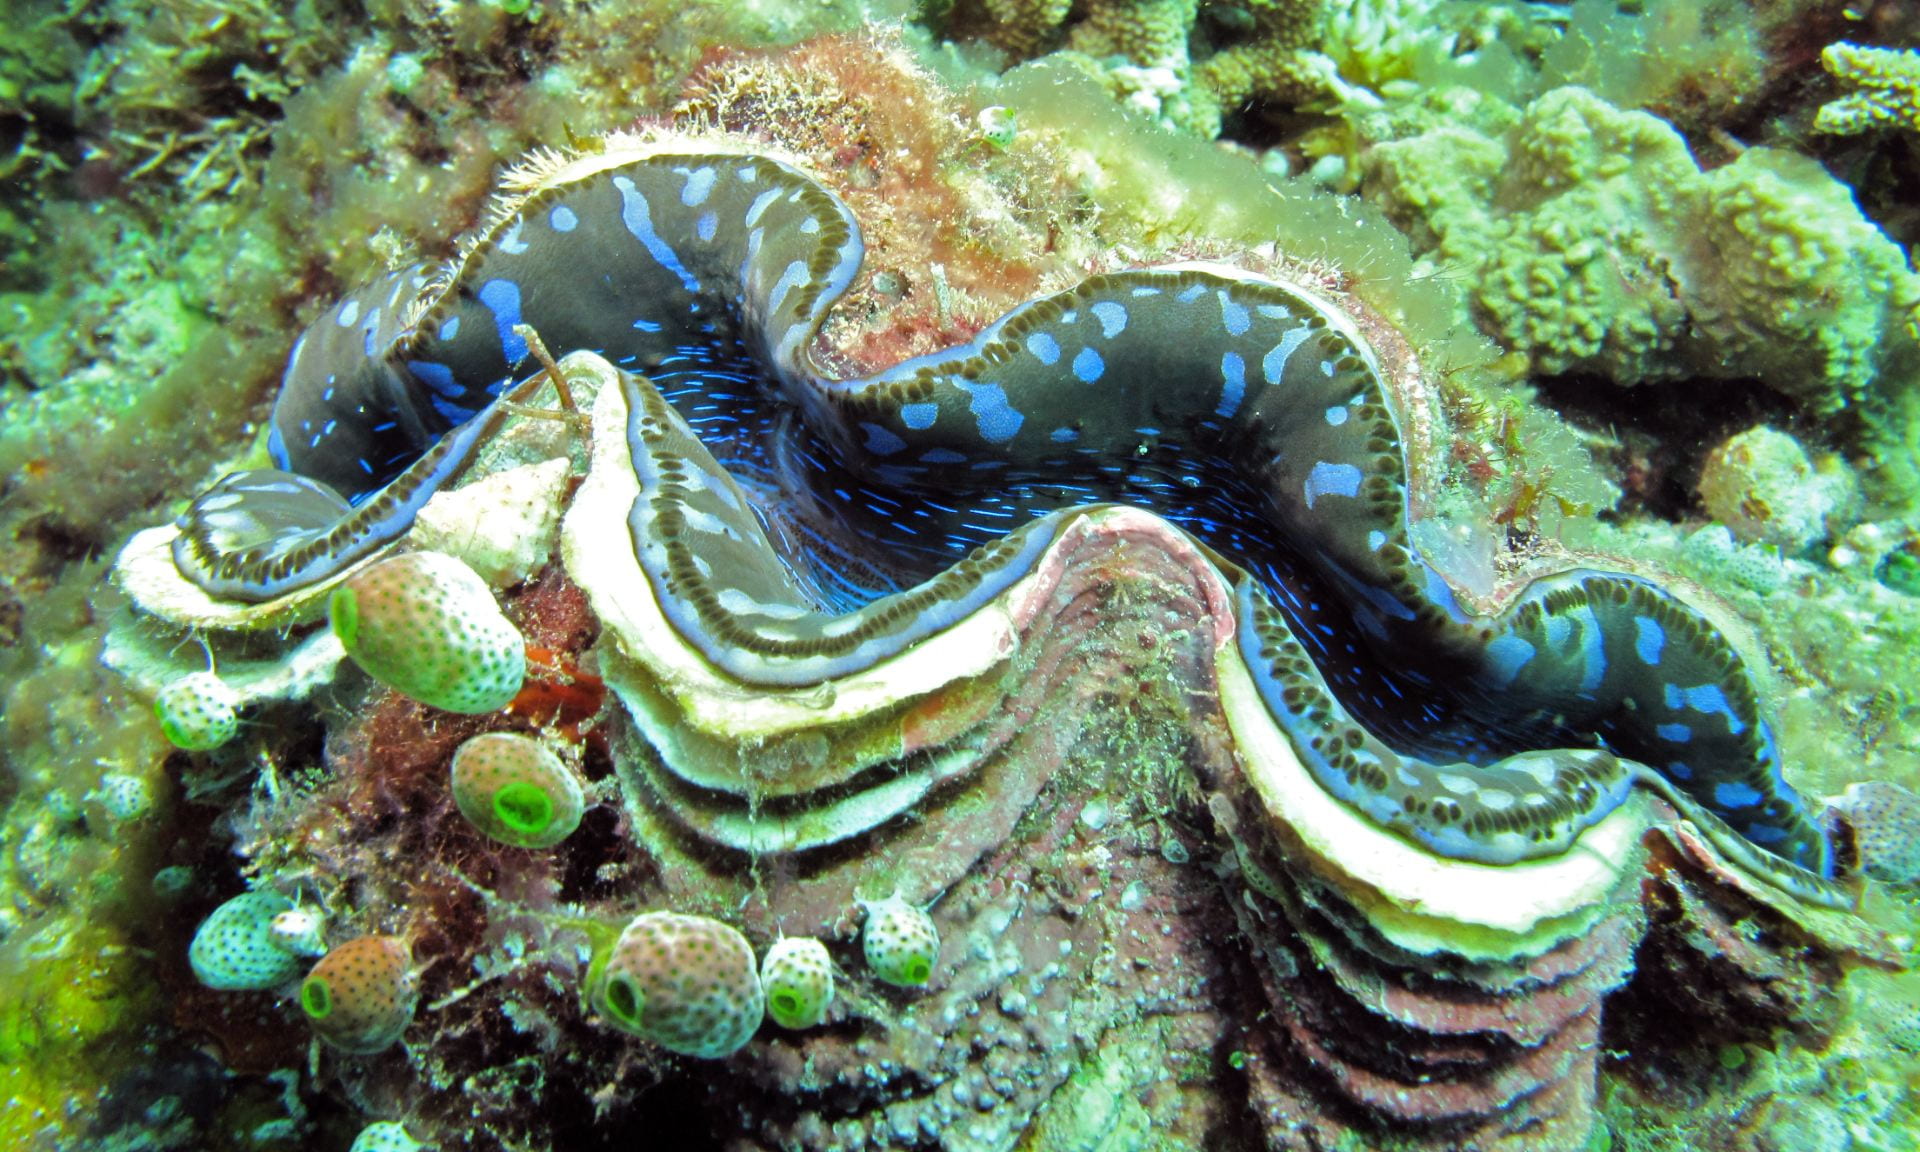 Tridacna maxima or Maxima clam has close-set scutes and its lower part is usually embedded in the substrate, features that distinguish it from other Giant clams. Photo by Bernard Dupont